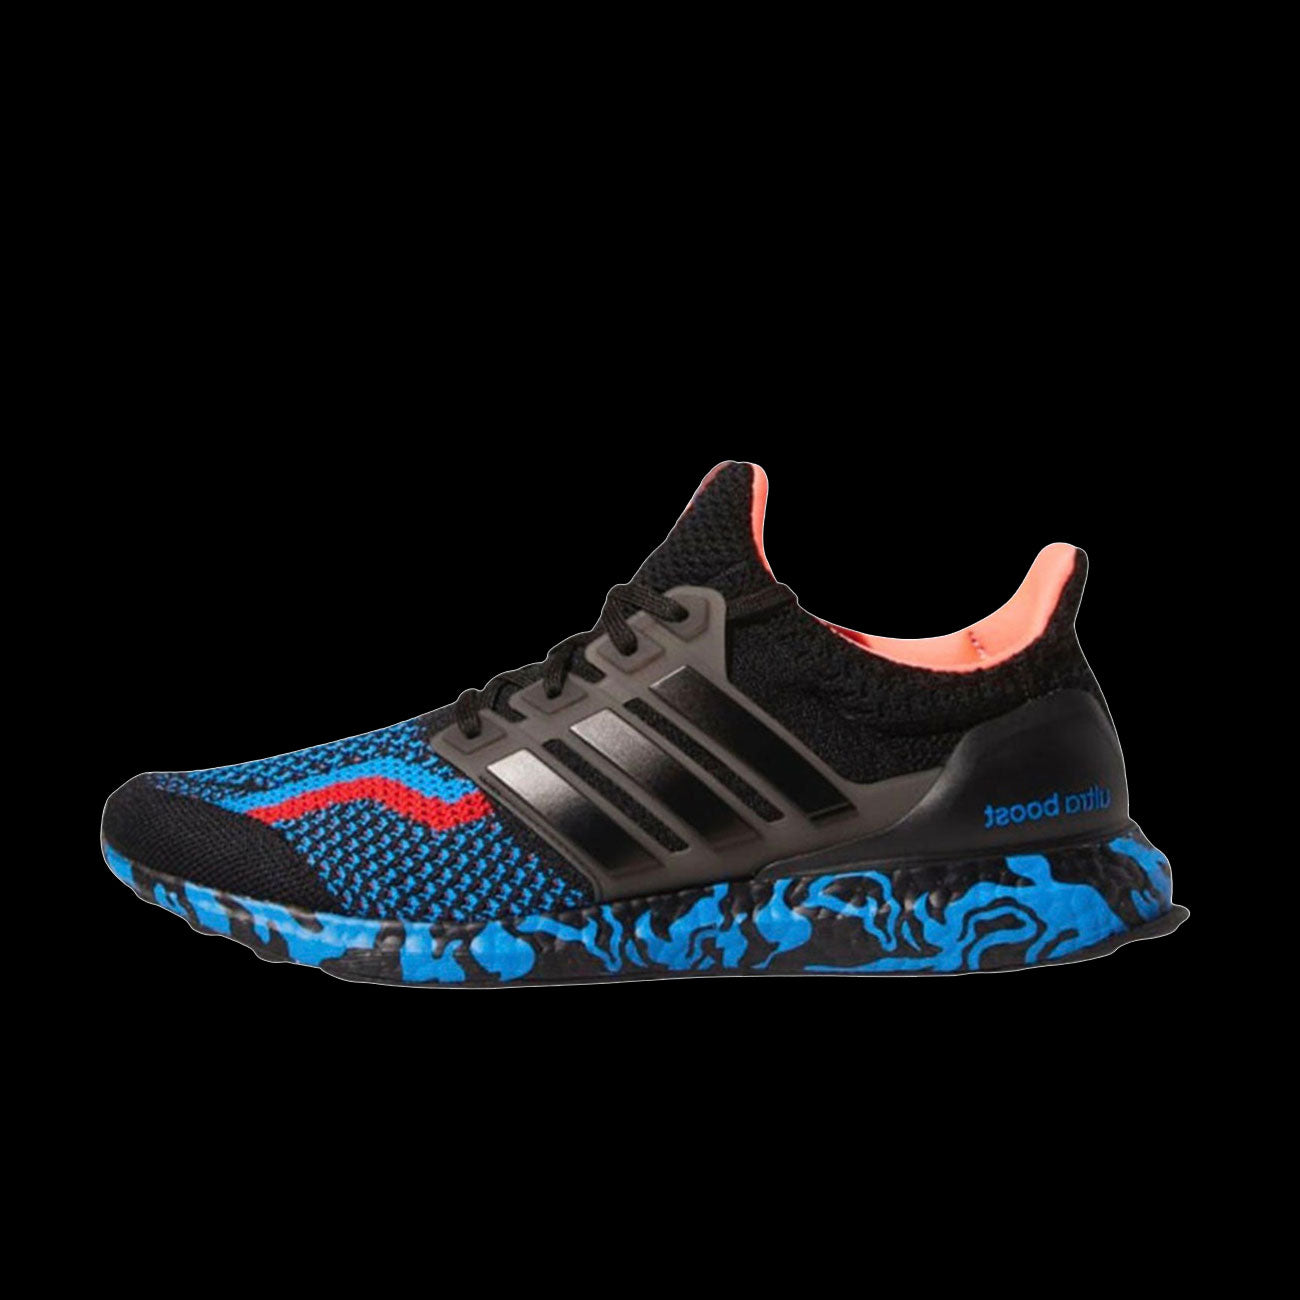 charla Sip Botánica Adidas Ultraboost 5.0 DNA (Core Black/ Core Black/ Vivid Red) – Two 18